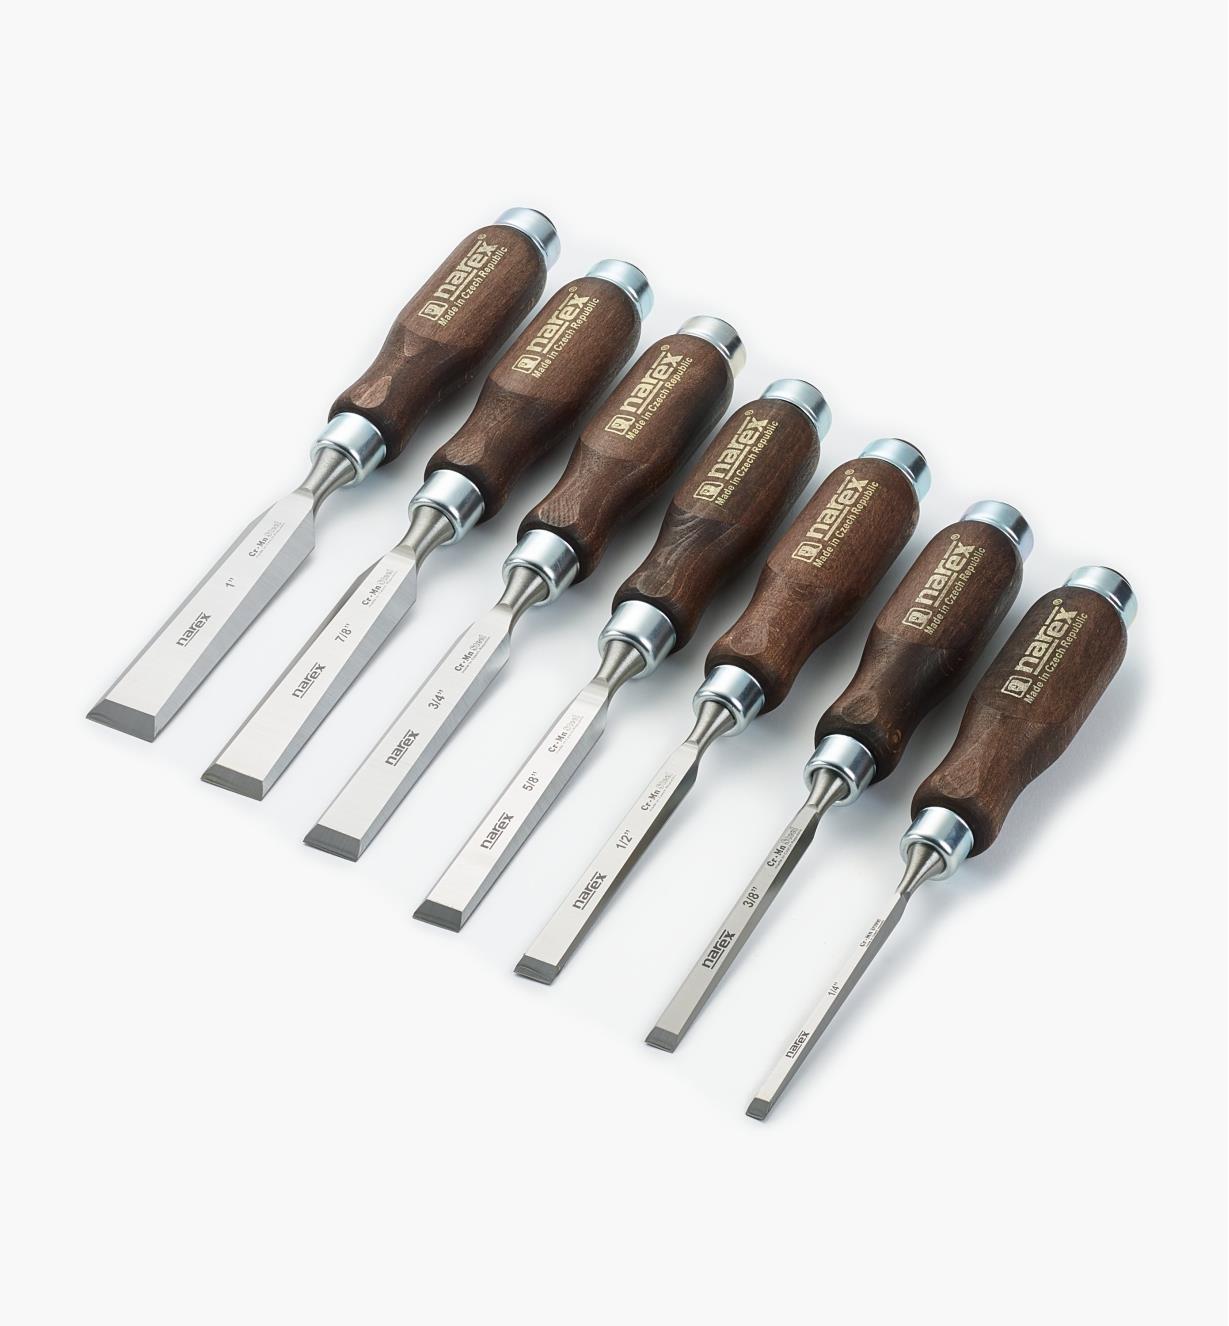 10S0977 - Narex Classic Bevel-Edge Chisels, Set of 7 (1/4" to 1")